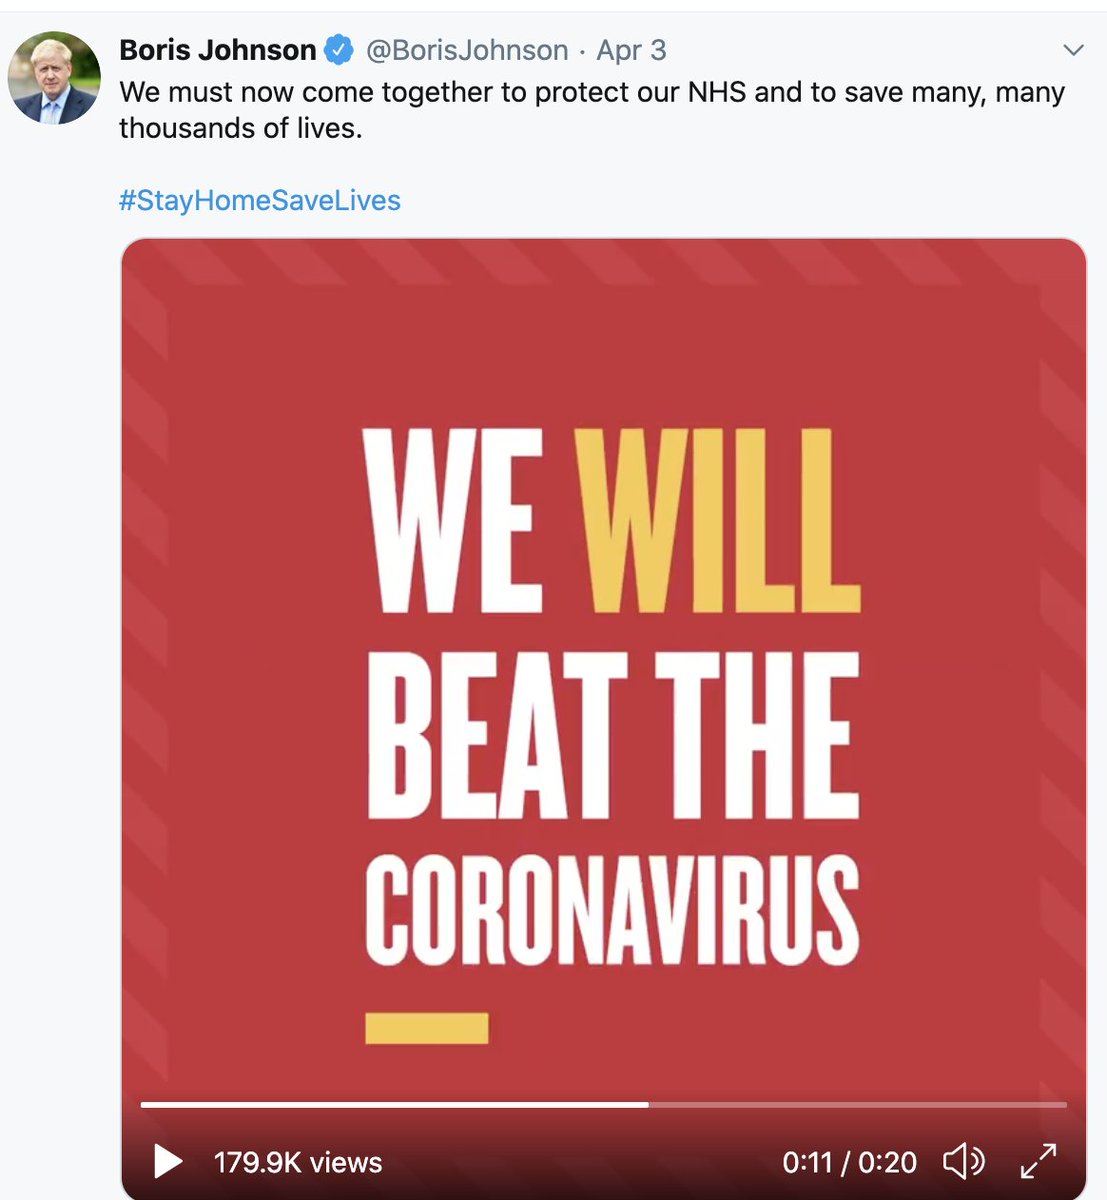 1. On April 3rd PM  @BorisJohnson posted a video here on Twitter ( https://twitter.com/BorisJohnson/status/1246073029030862852?s=20) where he says "We will BEAT  #Coronavirus"Now the verb used has significantly changed.It's not "beat" anymore, but CONTROL.This sounds like a massive change in strategy.